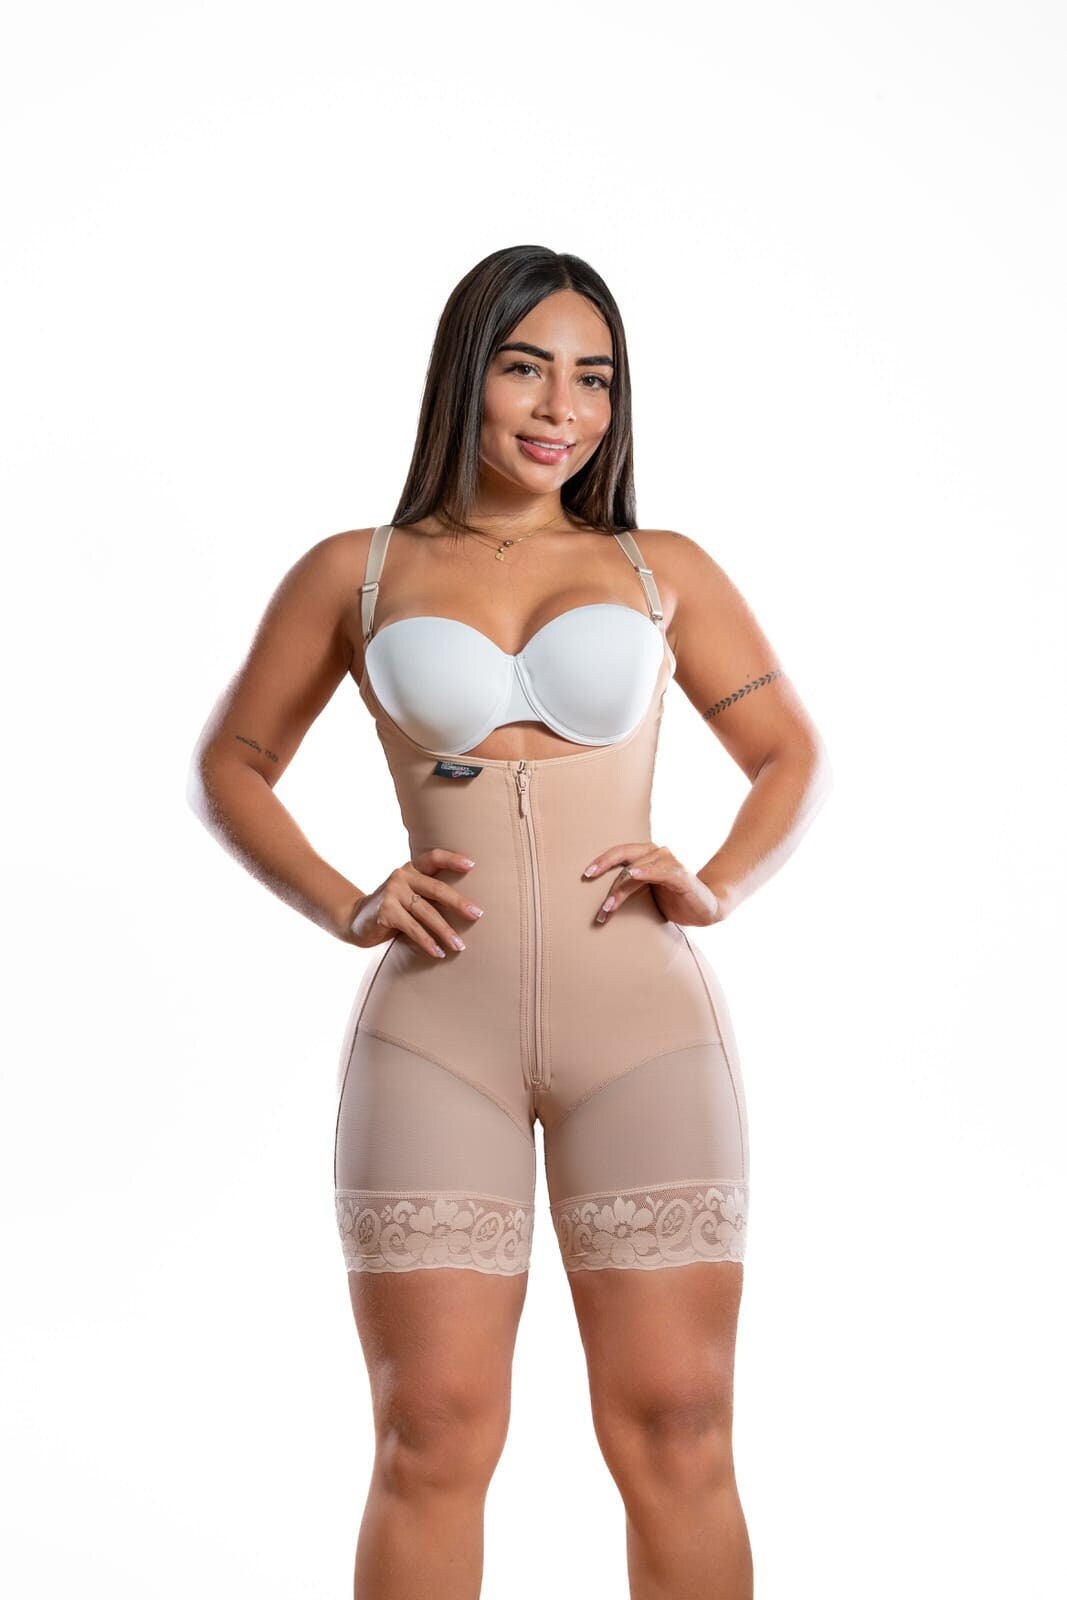 UpLady 6172 Tummy Control Butt Lifter Knee Length Bodysuit Open Bust P –  Curved By Angeliques